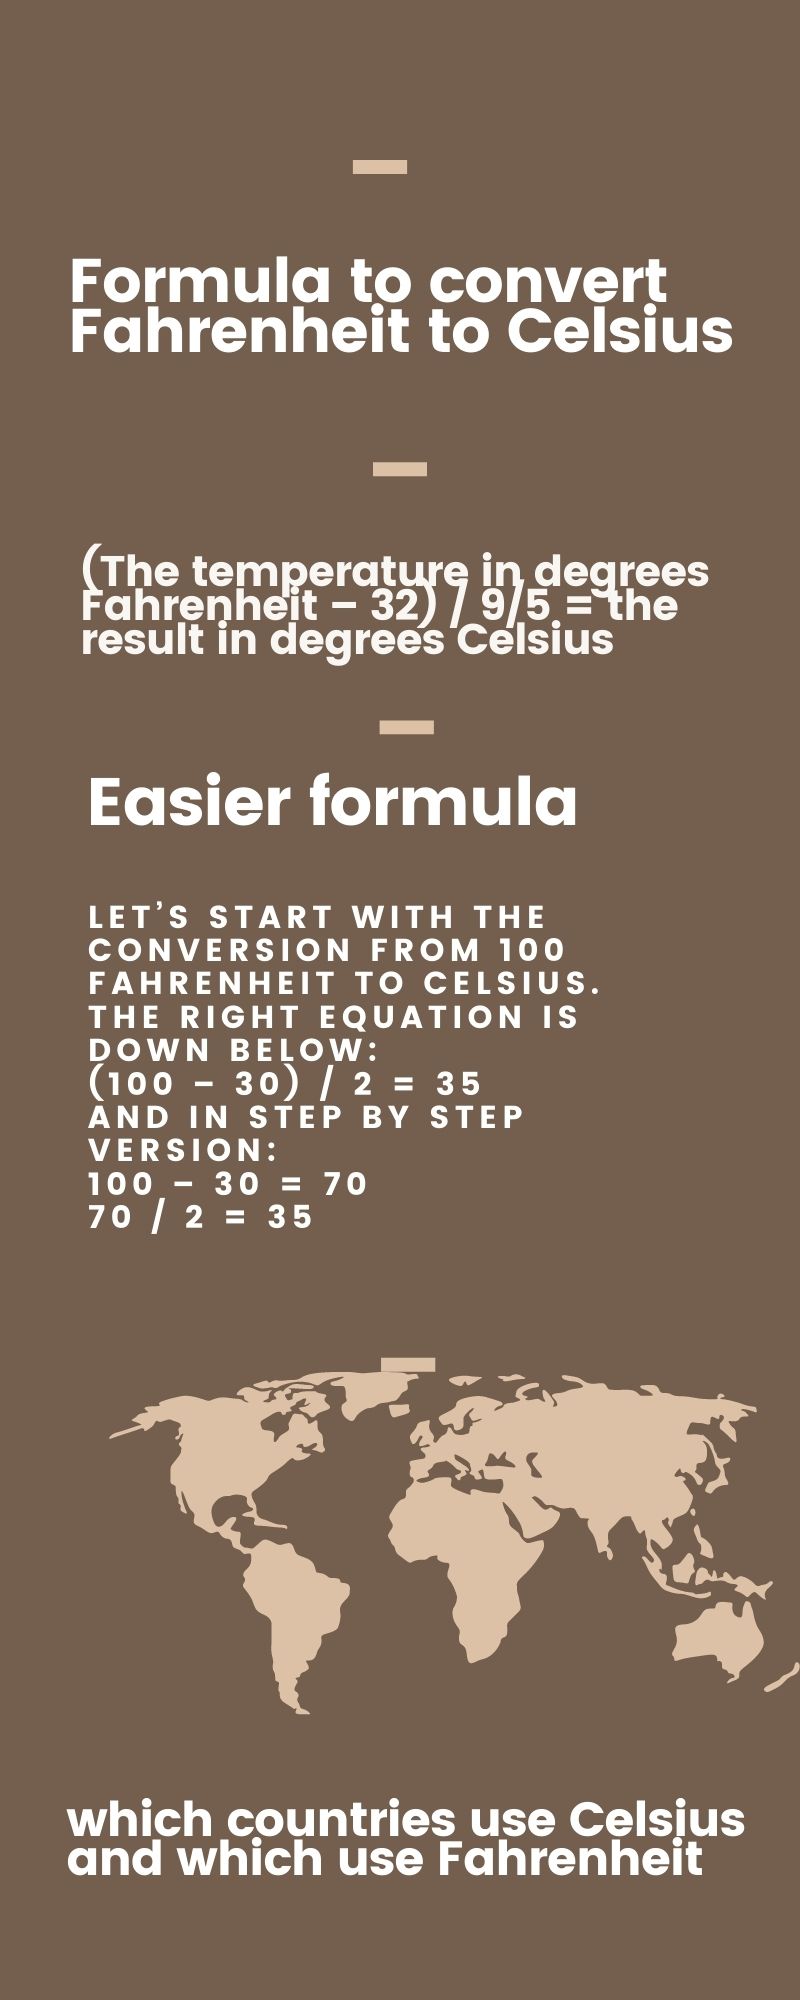 Formula on how to convert Fahrenheit to Celsius - infographic